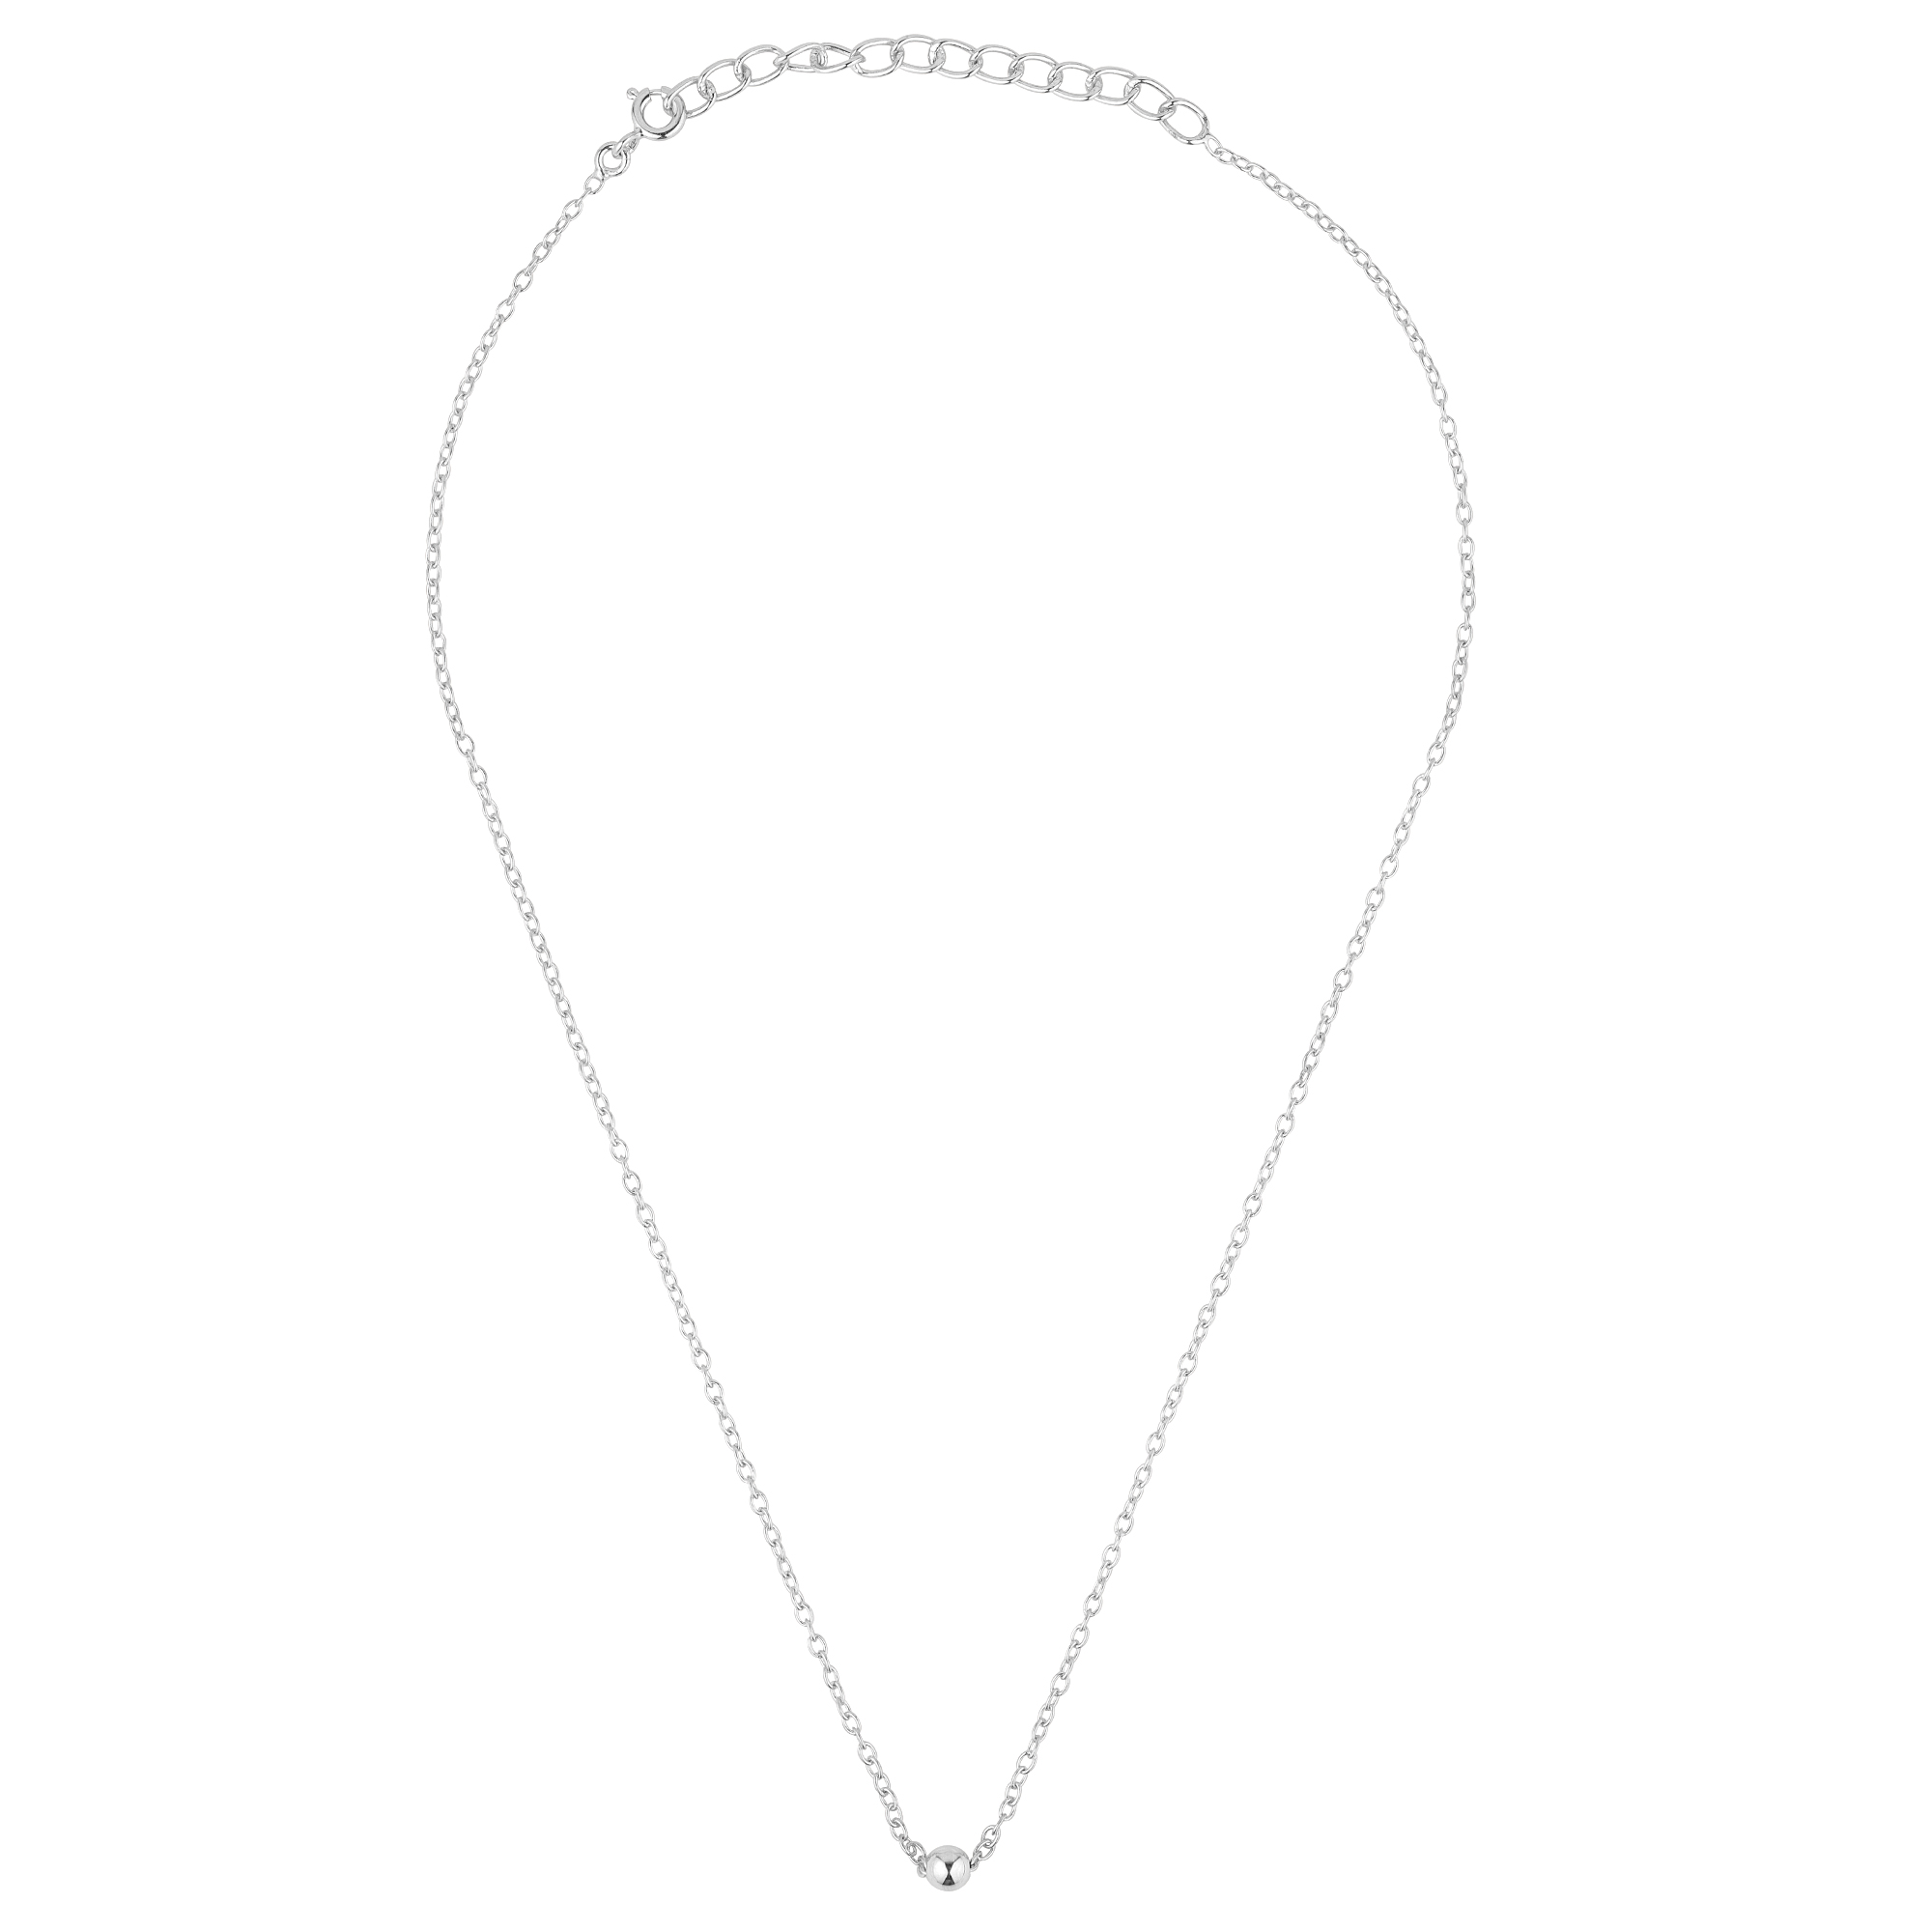 4mm Ball necklace in 925 sterling silver